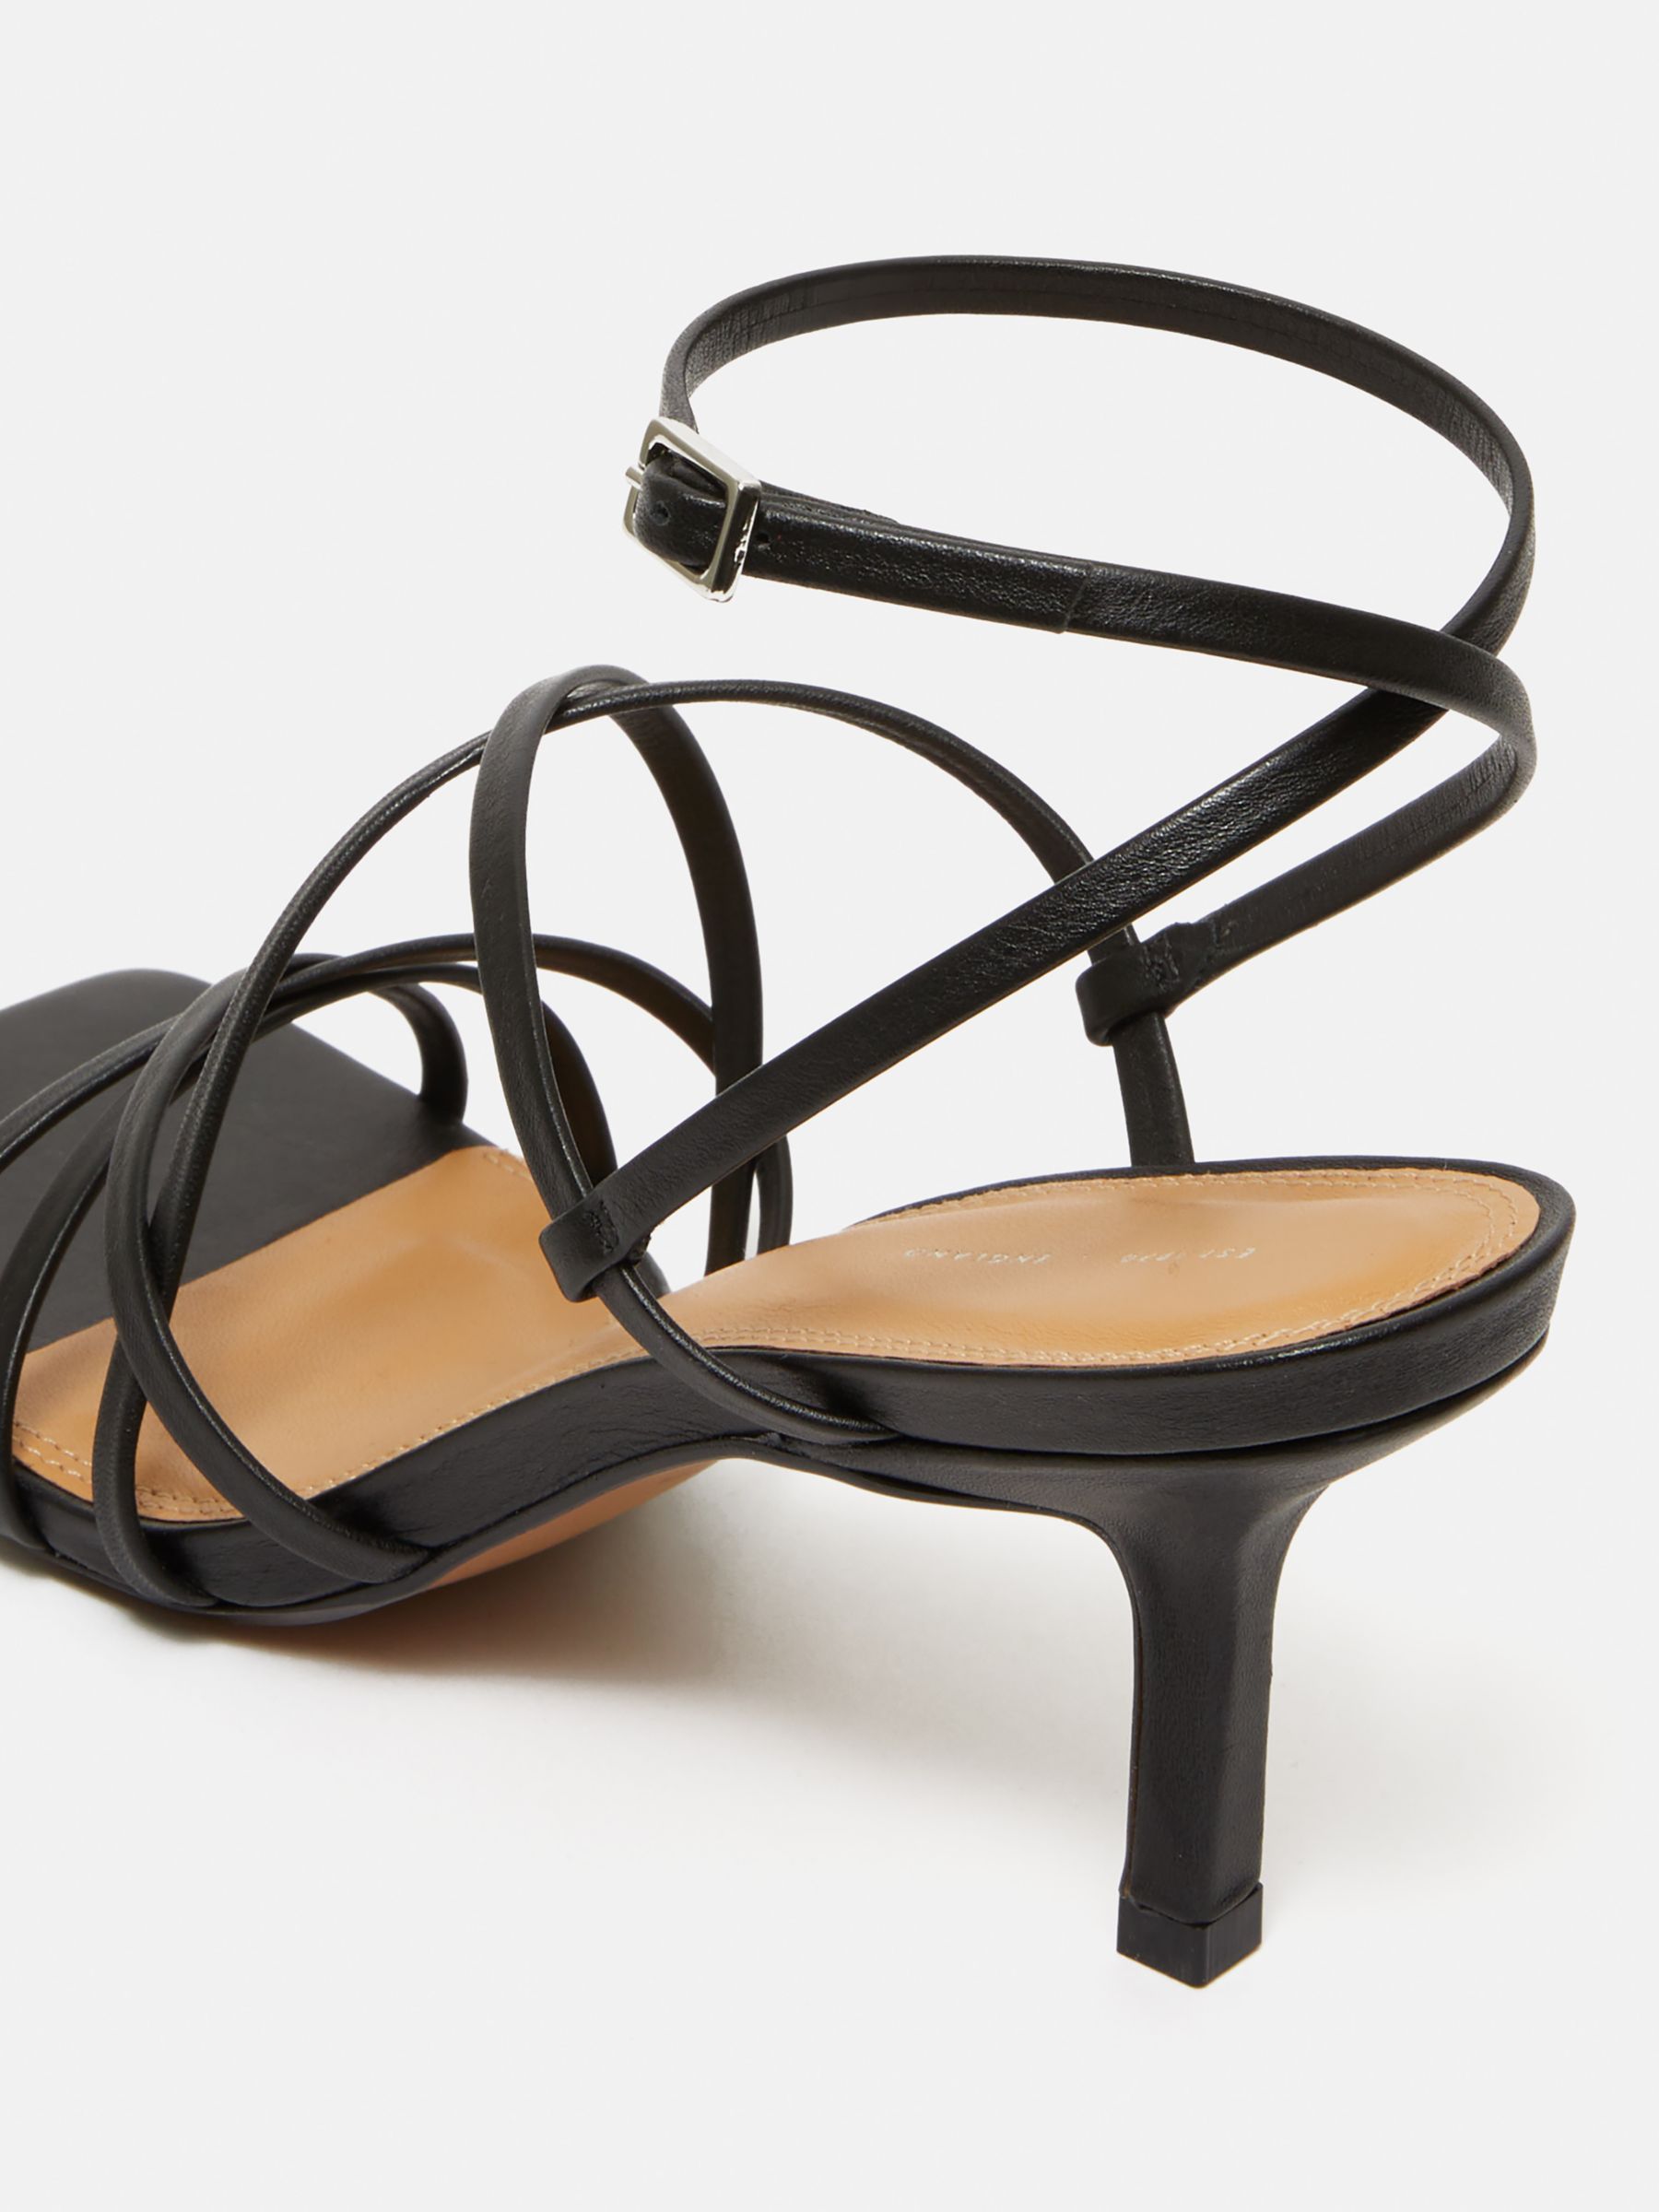 Buy Jigsaw Sofia Strappy Leather Sandals, Black Online at johnlewis.com